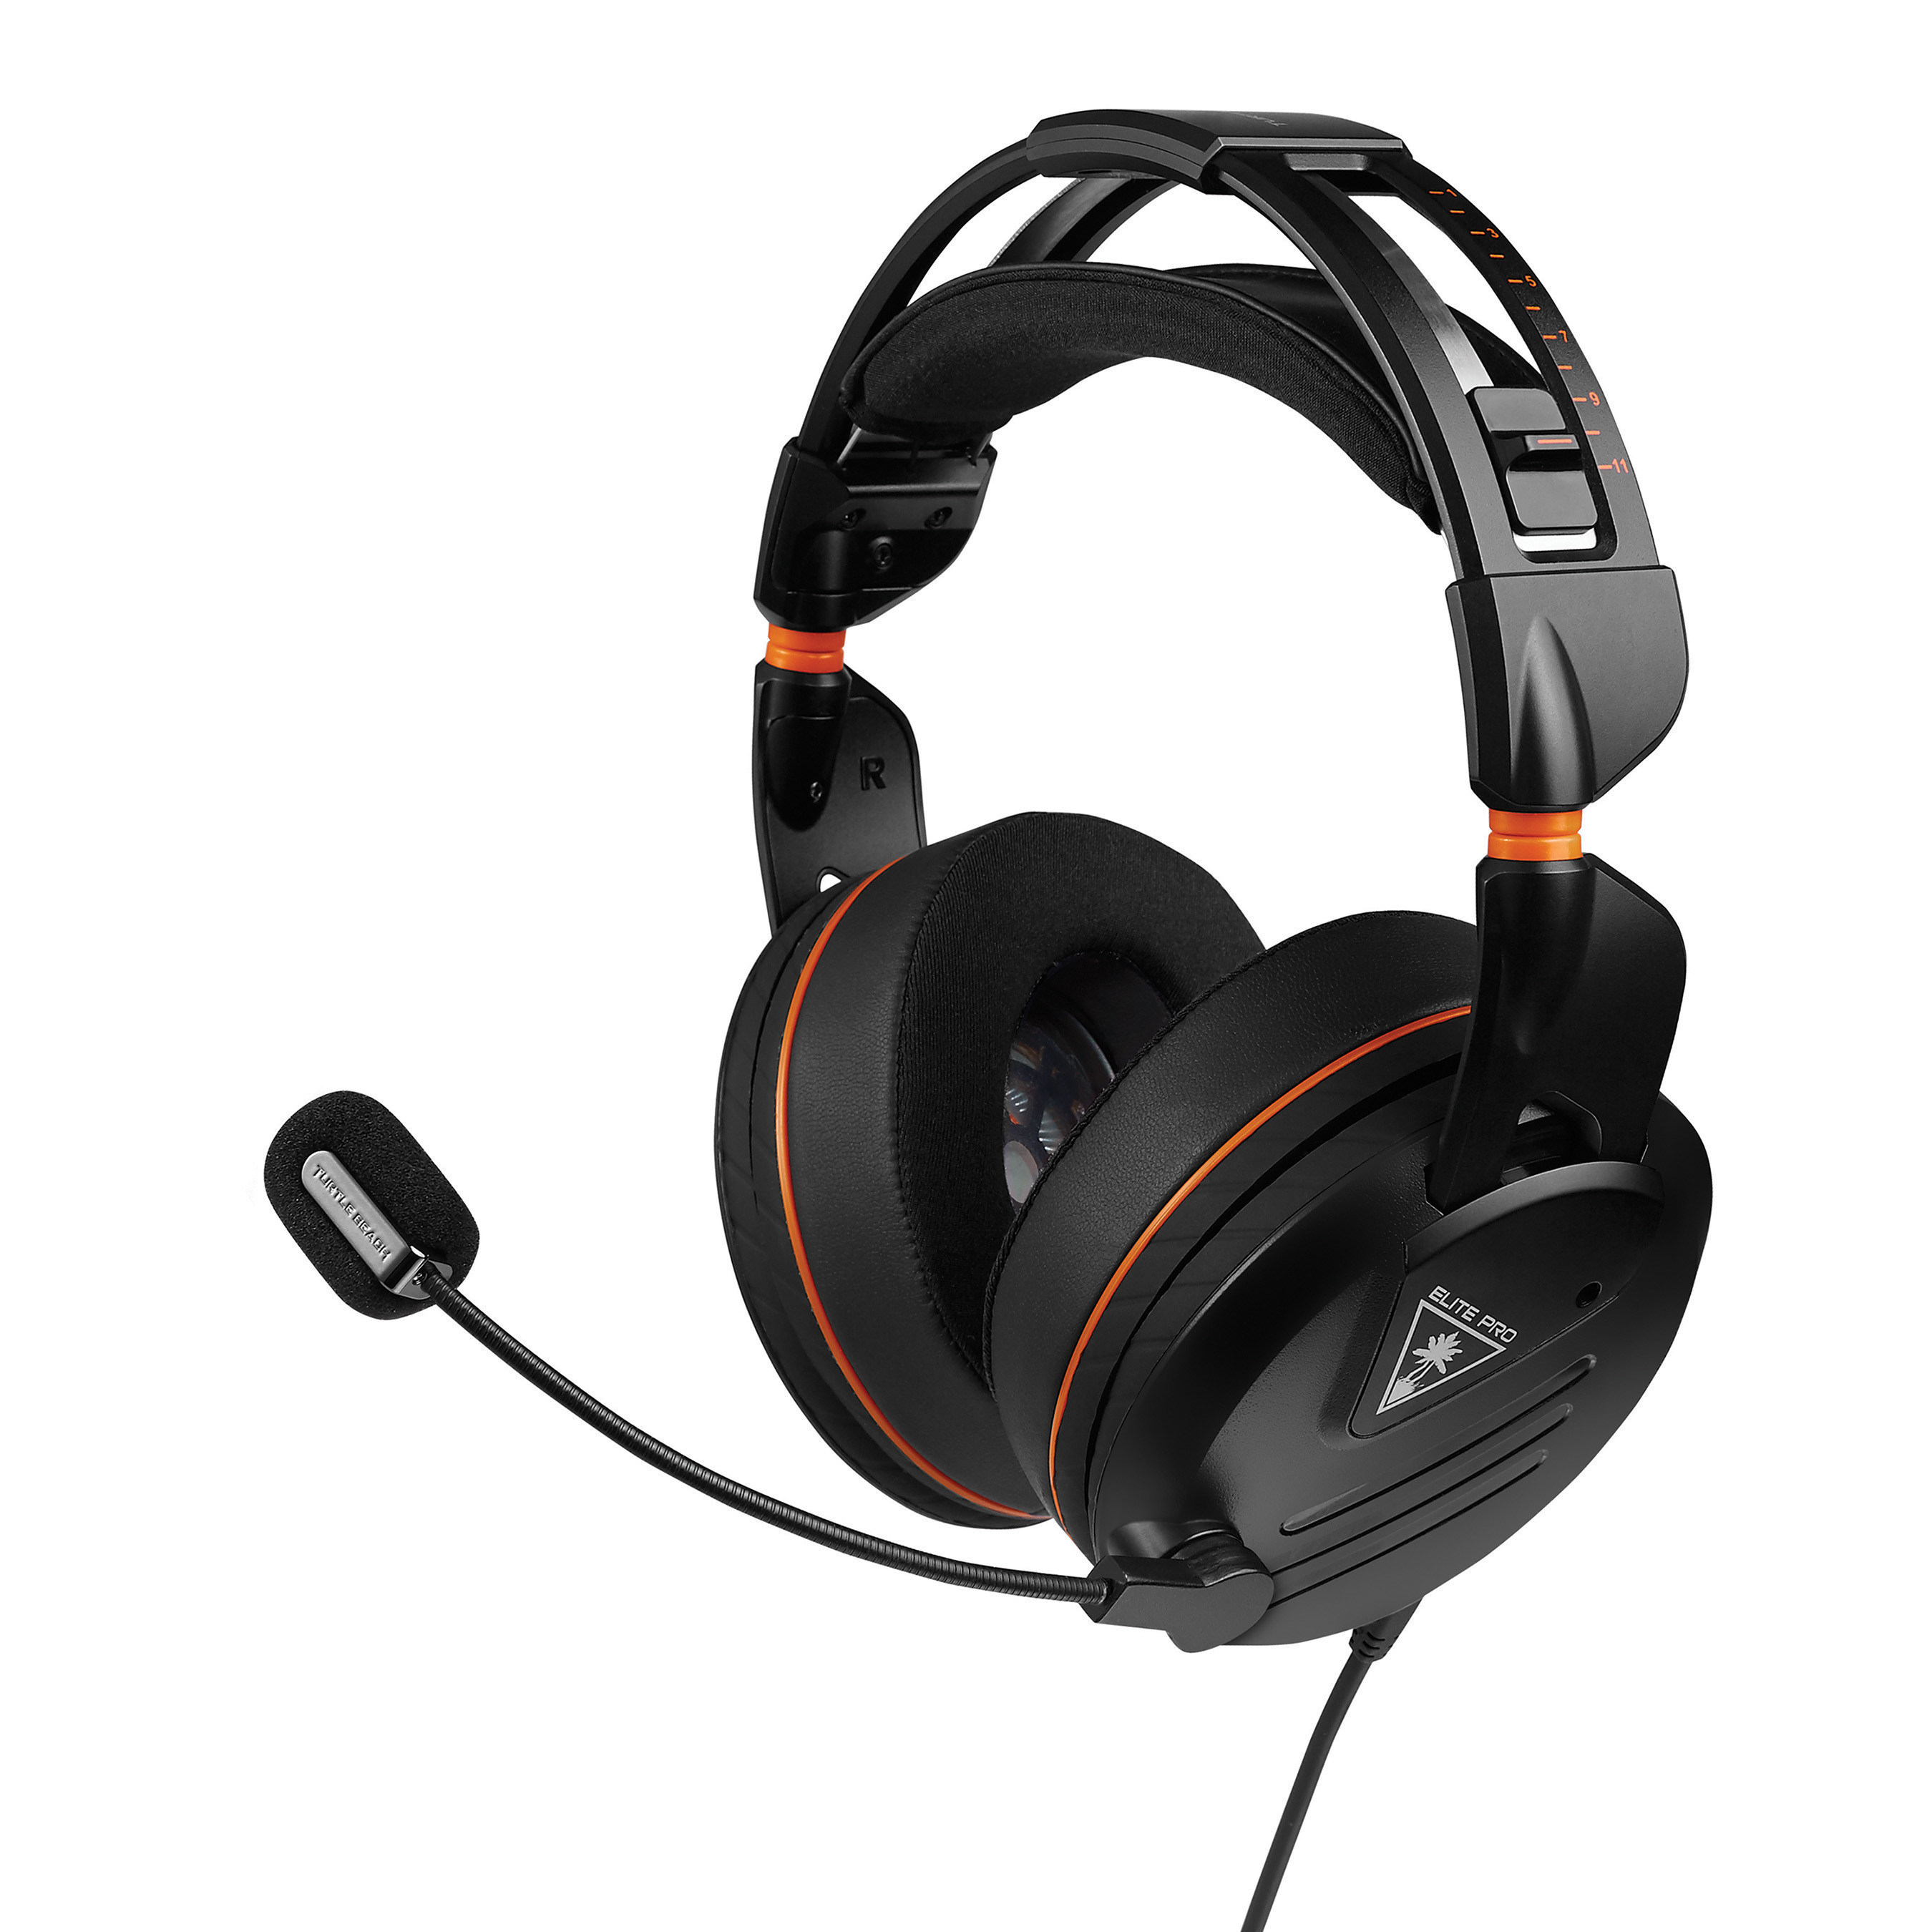 Turtle Beach's all-new Elite Pro Tournament Gaming Headset, which sets the new standard for competitive gaming performance and comfort, is available to purchase on Sunday, June 12th.